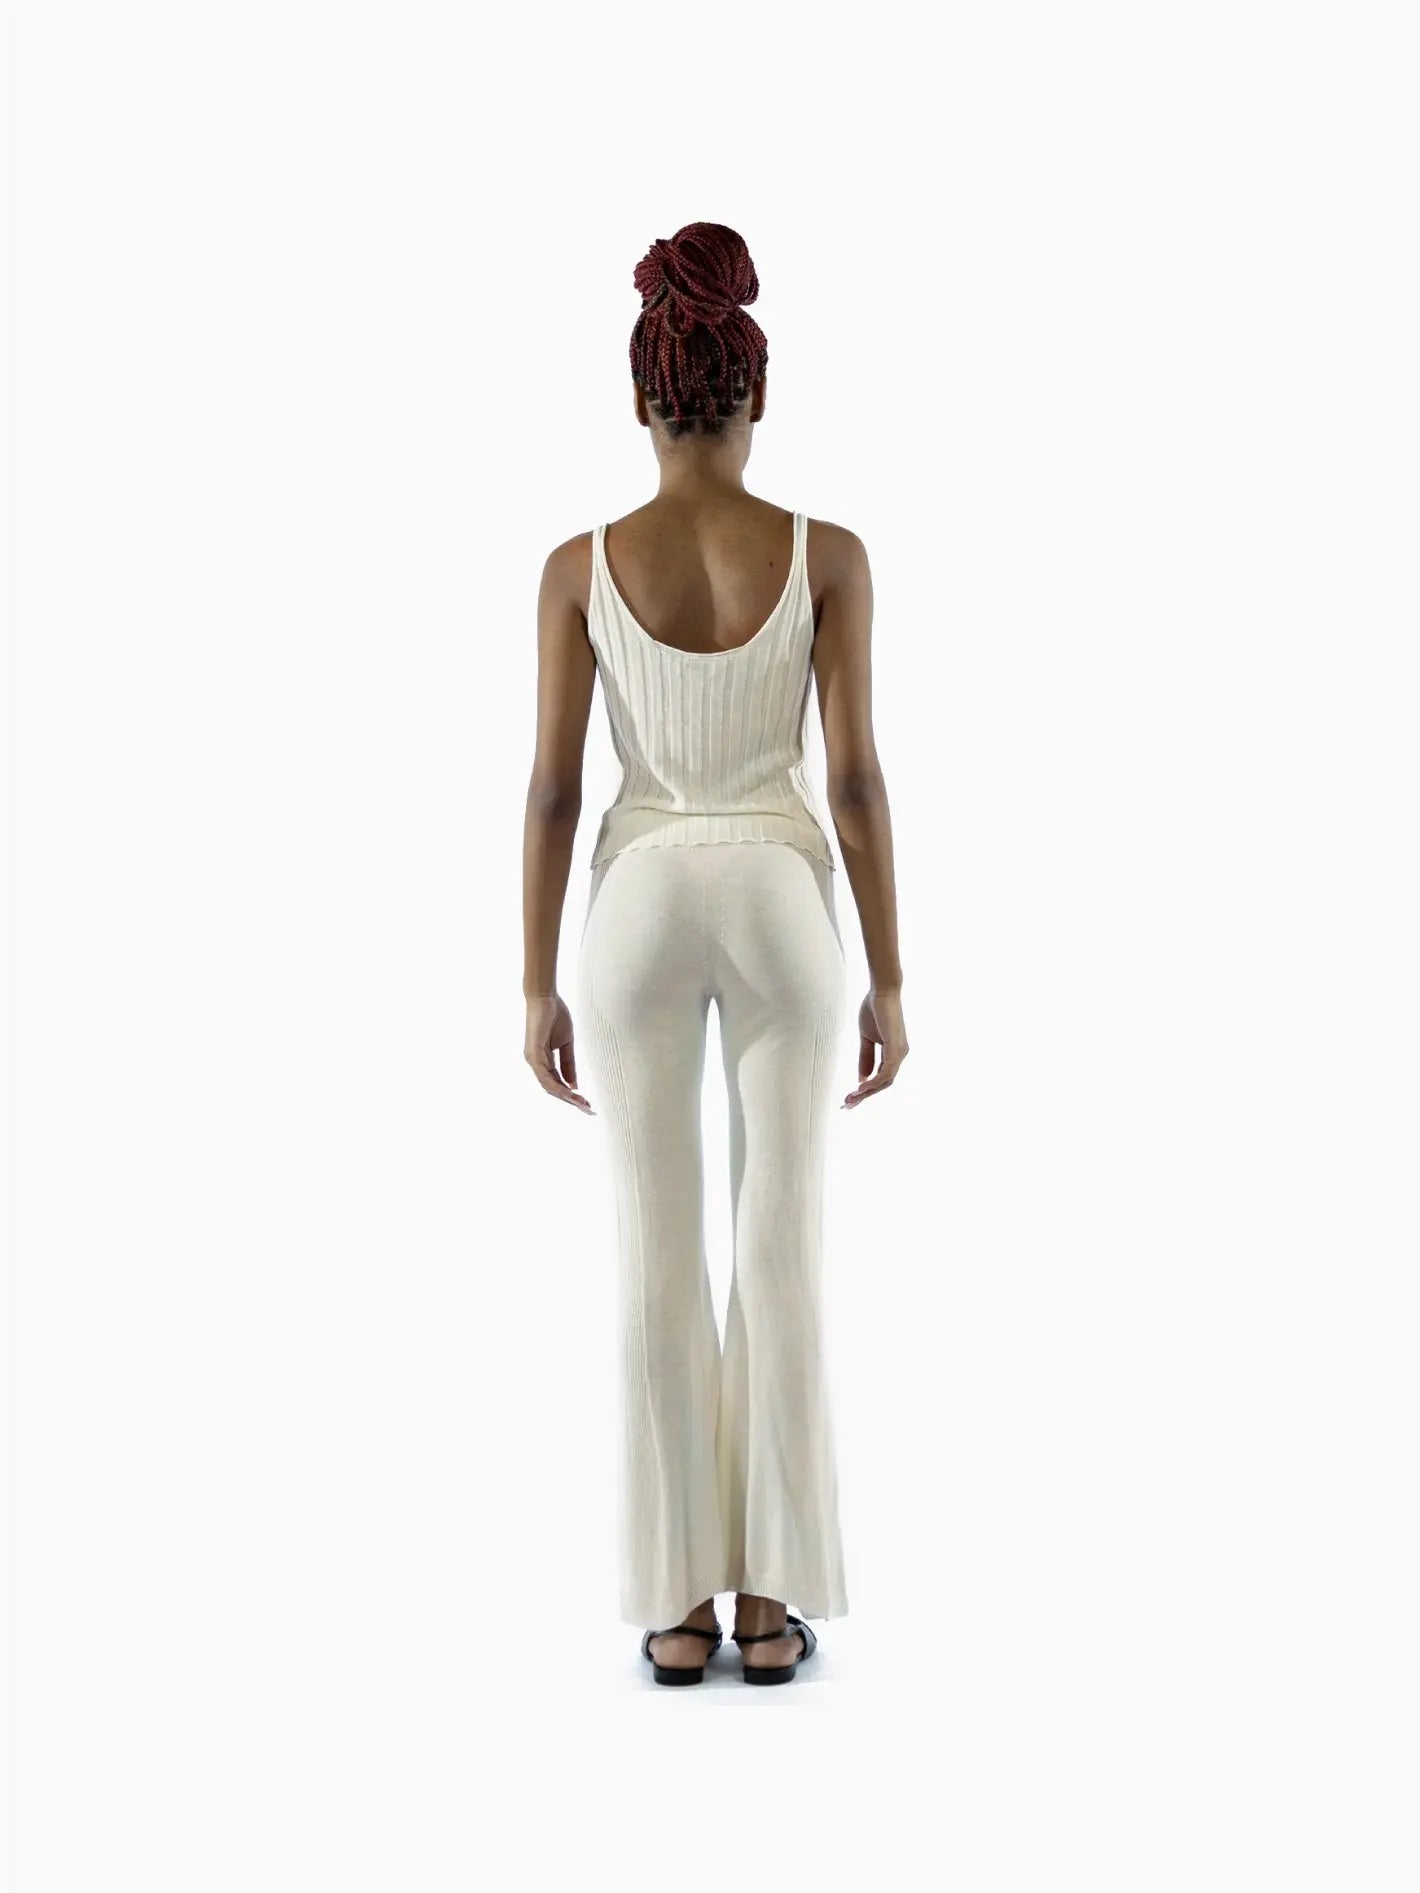 A person stands facing forward, dressed in a sleeveless, ribbed, cream-colored top and matching Lec Pants Ecru by Bielo with a slight flare. They have their hands by their sides and are wearing black shoes. The minimalist elegance of the outfit evokes the chic style reminiscent of Barcelona's fashion scene.